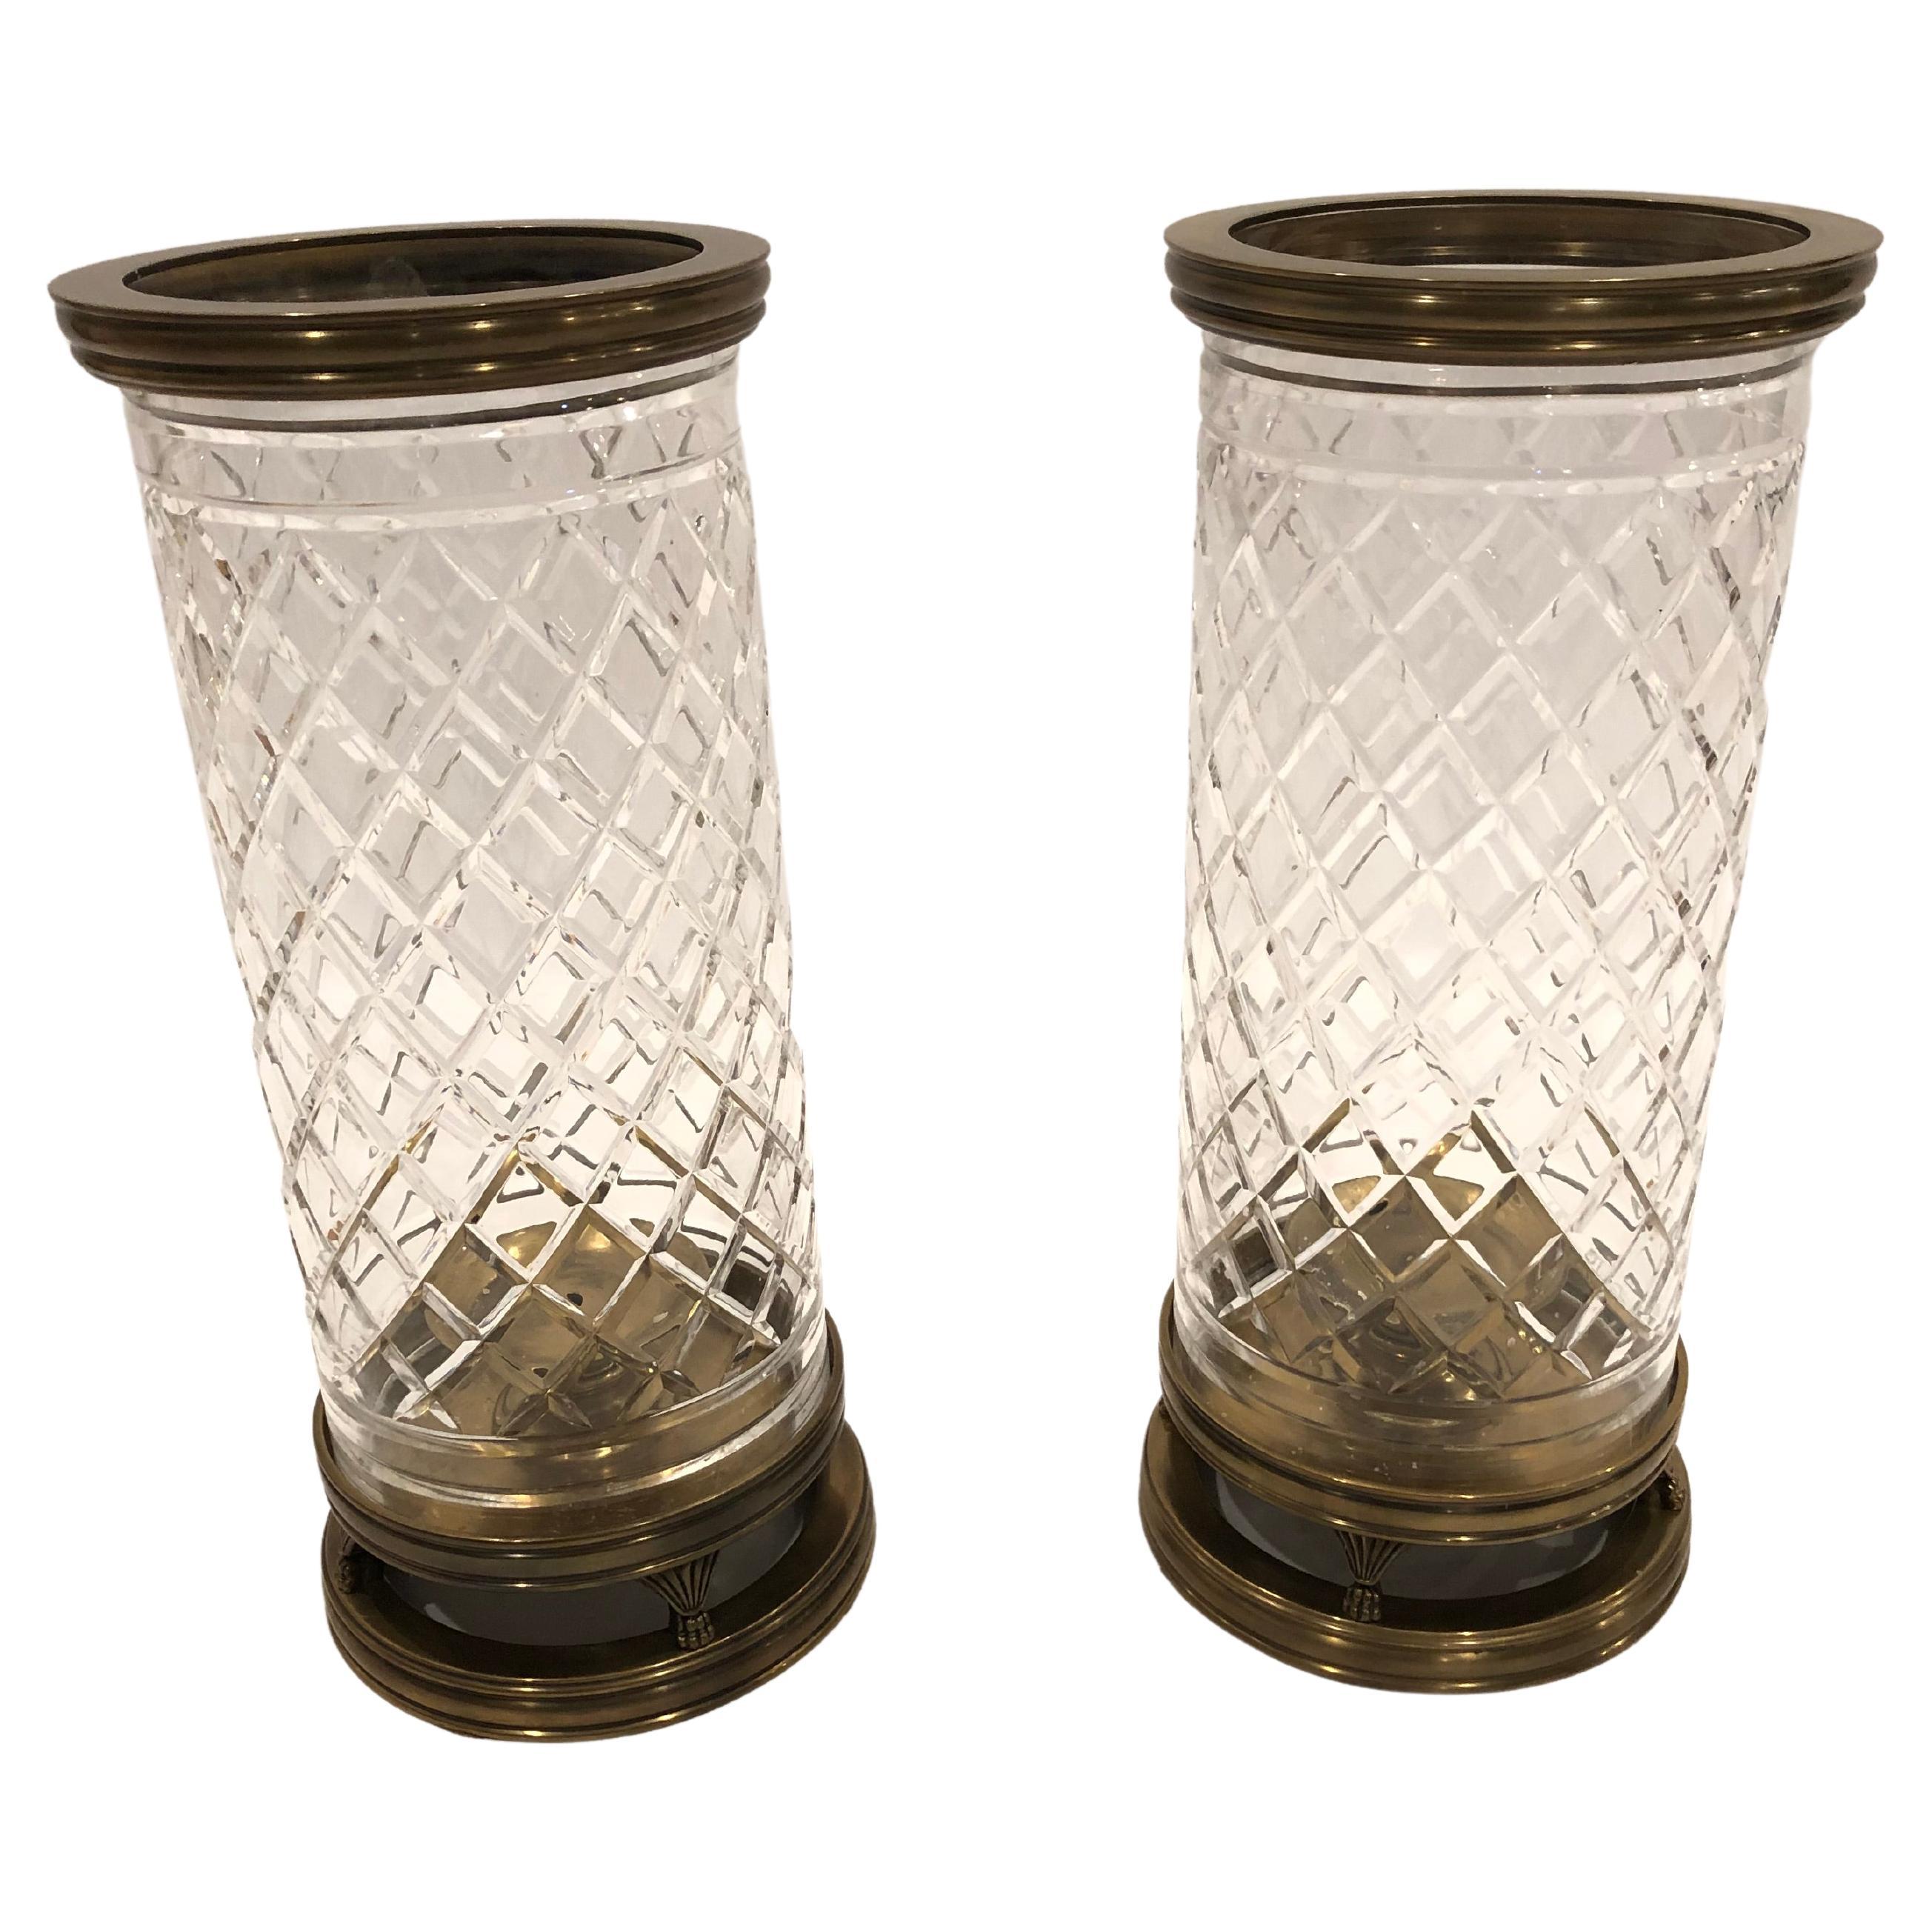 Beautiful Large Pair of Brass and Cut Glass Columnar Hurricanes Candle Holders